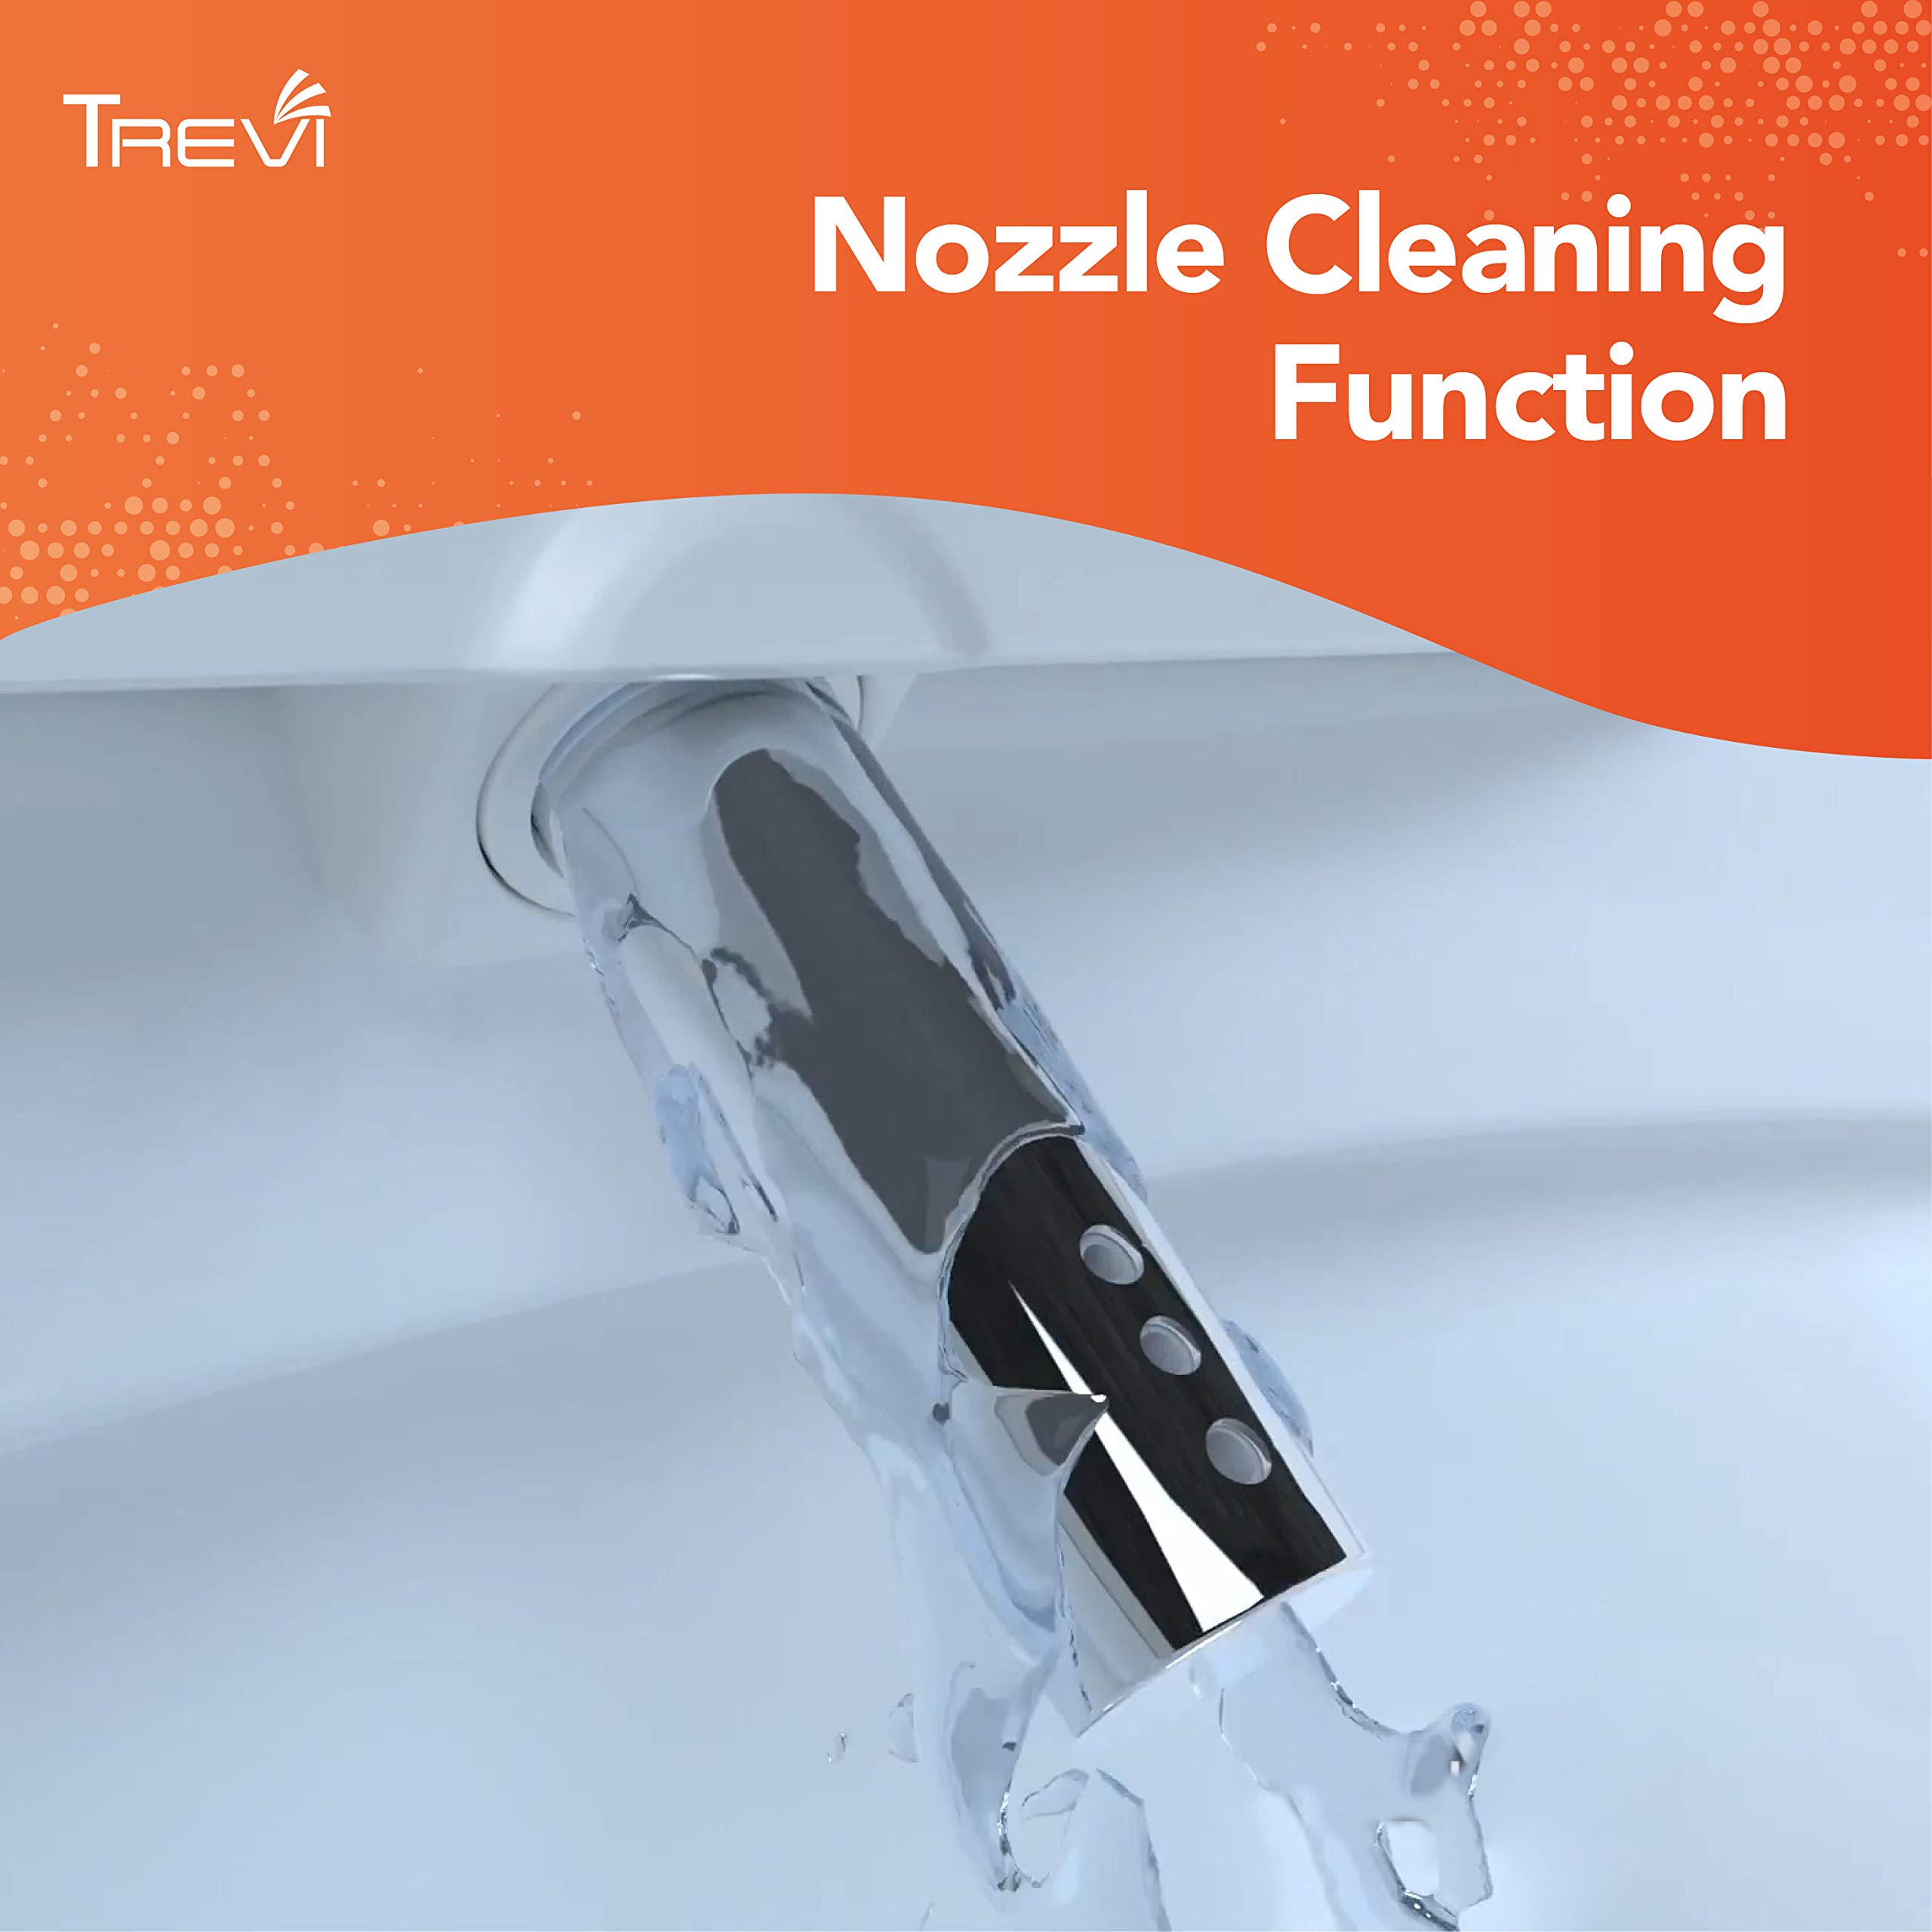 TREVI Bidet Toilet Seat, Elongated White Seat Sleek Design, Warm Air Dryer, Rear & Front Wash, Stainless Steel Nozzle, Nozzle Self-Cleaning, Nozzle Oscillation and Pulse, Korea Made AB210